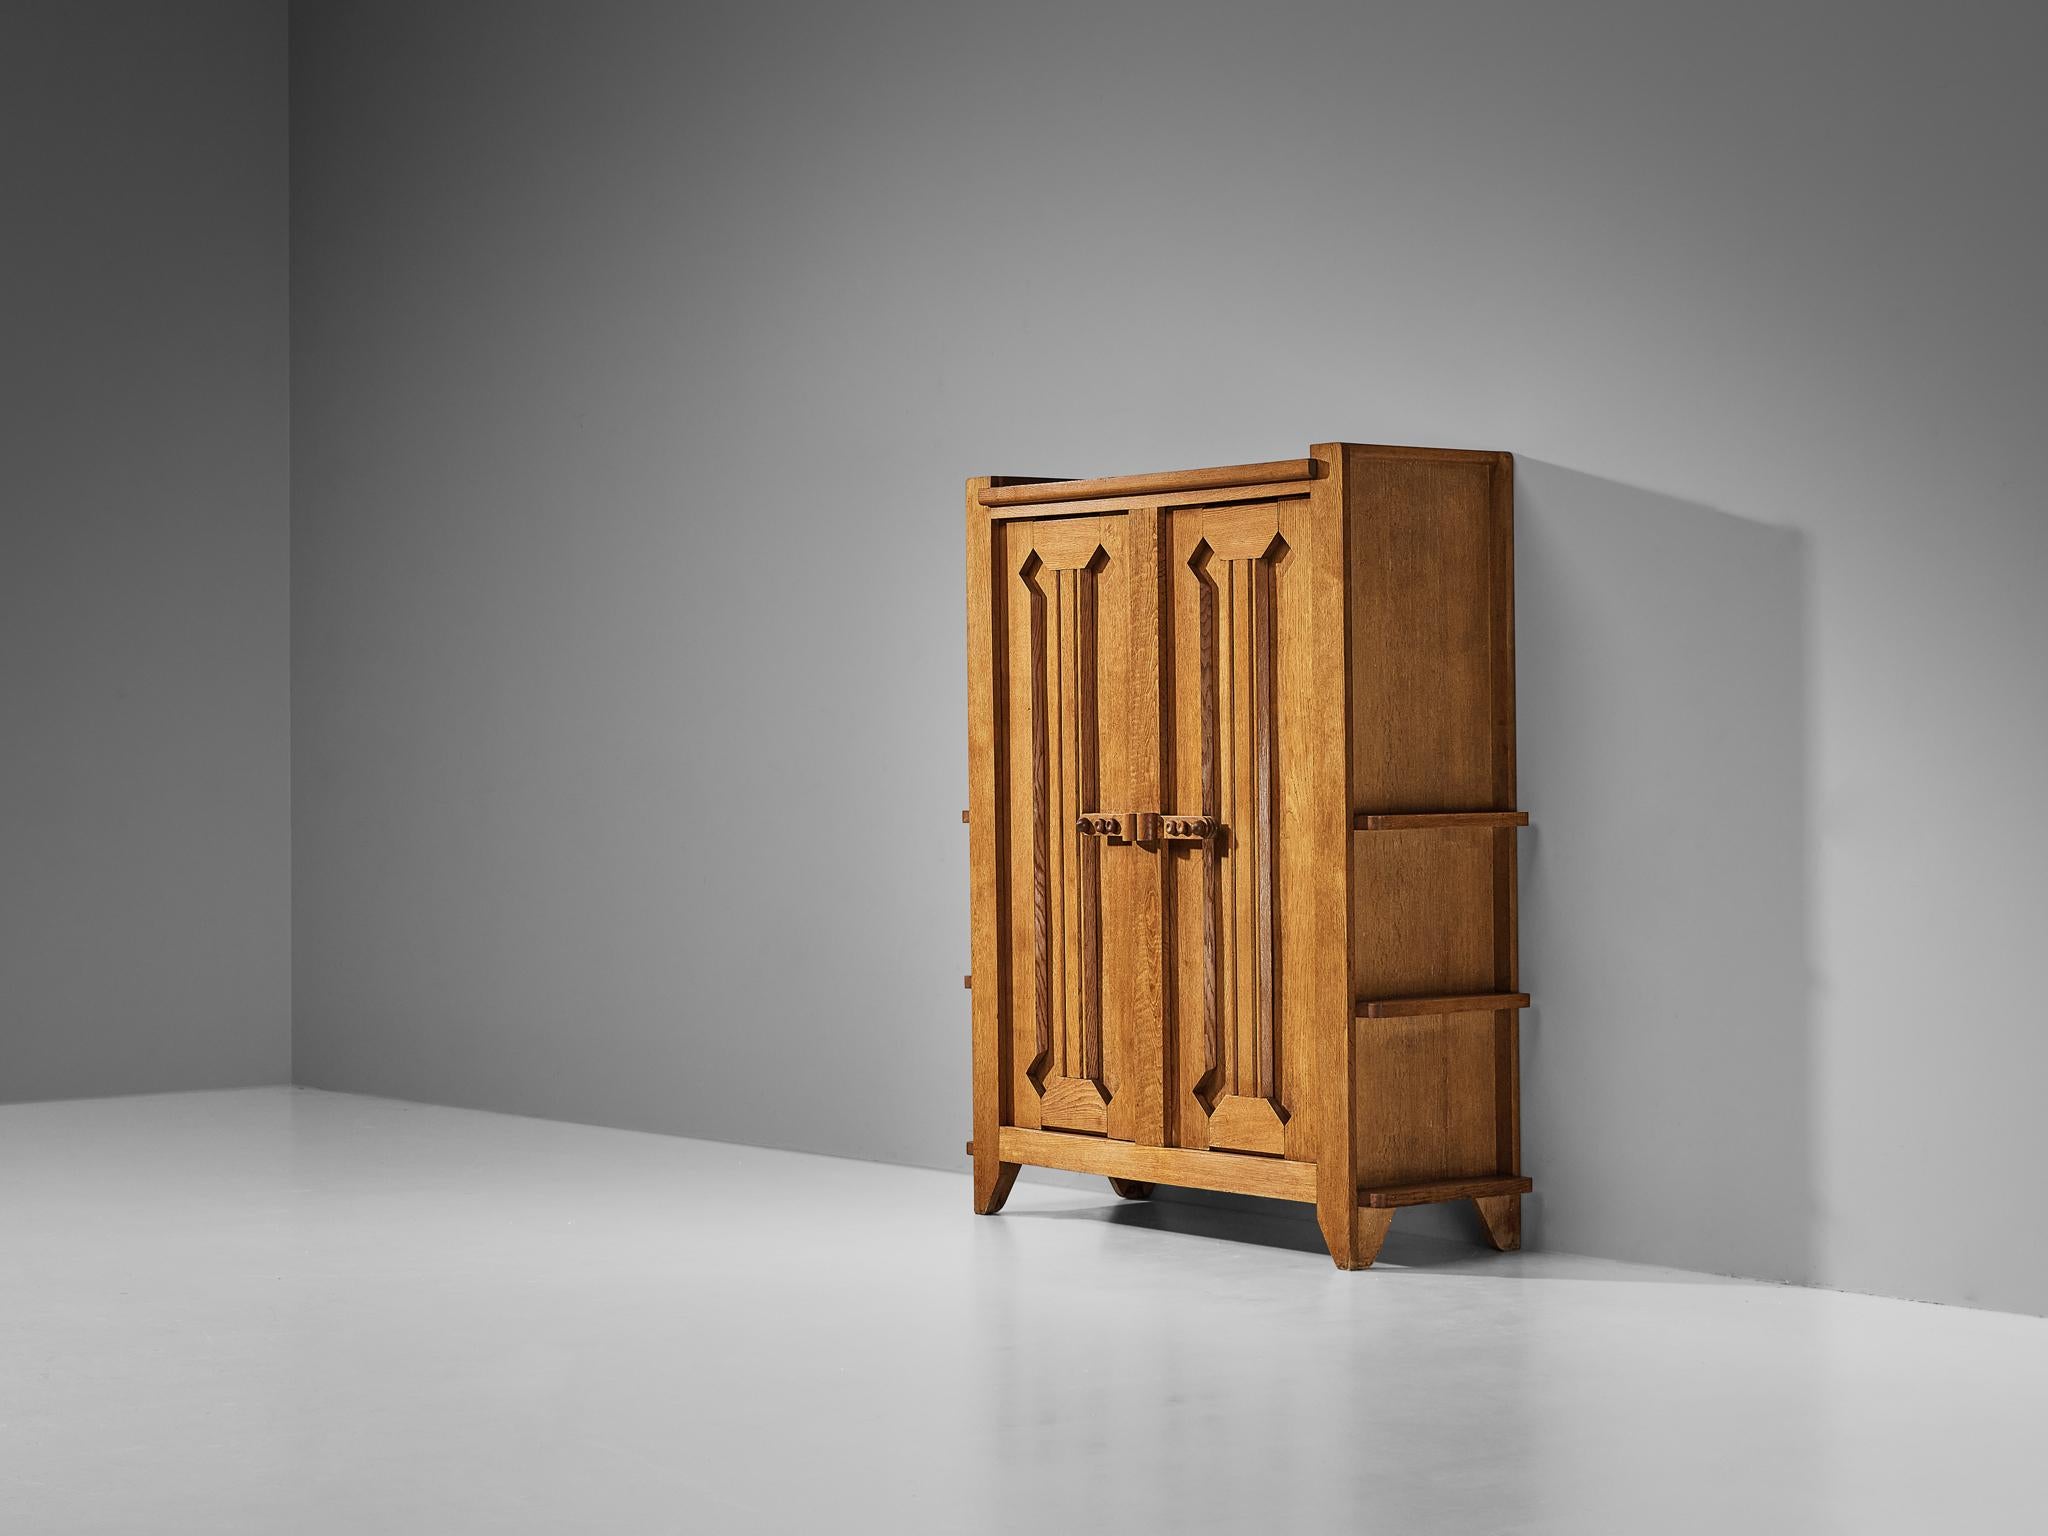 Guillerme et Chambron for Votre Maison, wardrobe, solid oak, metal, France, 1960s

This wardrobe is based on a well-designed structure where aesthetics and functionally go hand in hand. The door panels have the characteristics of the French designer